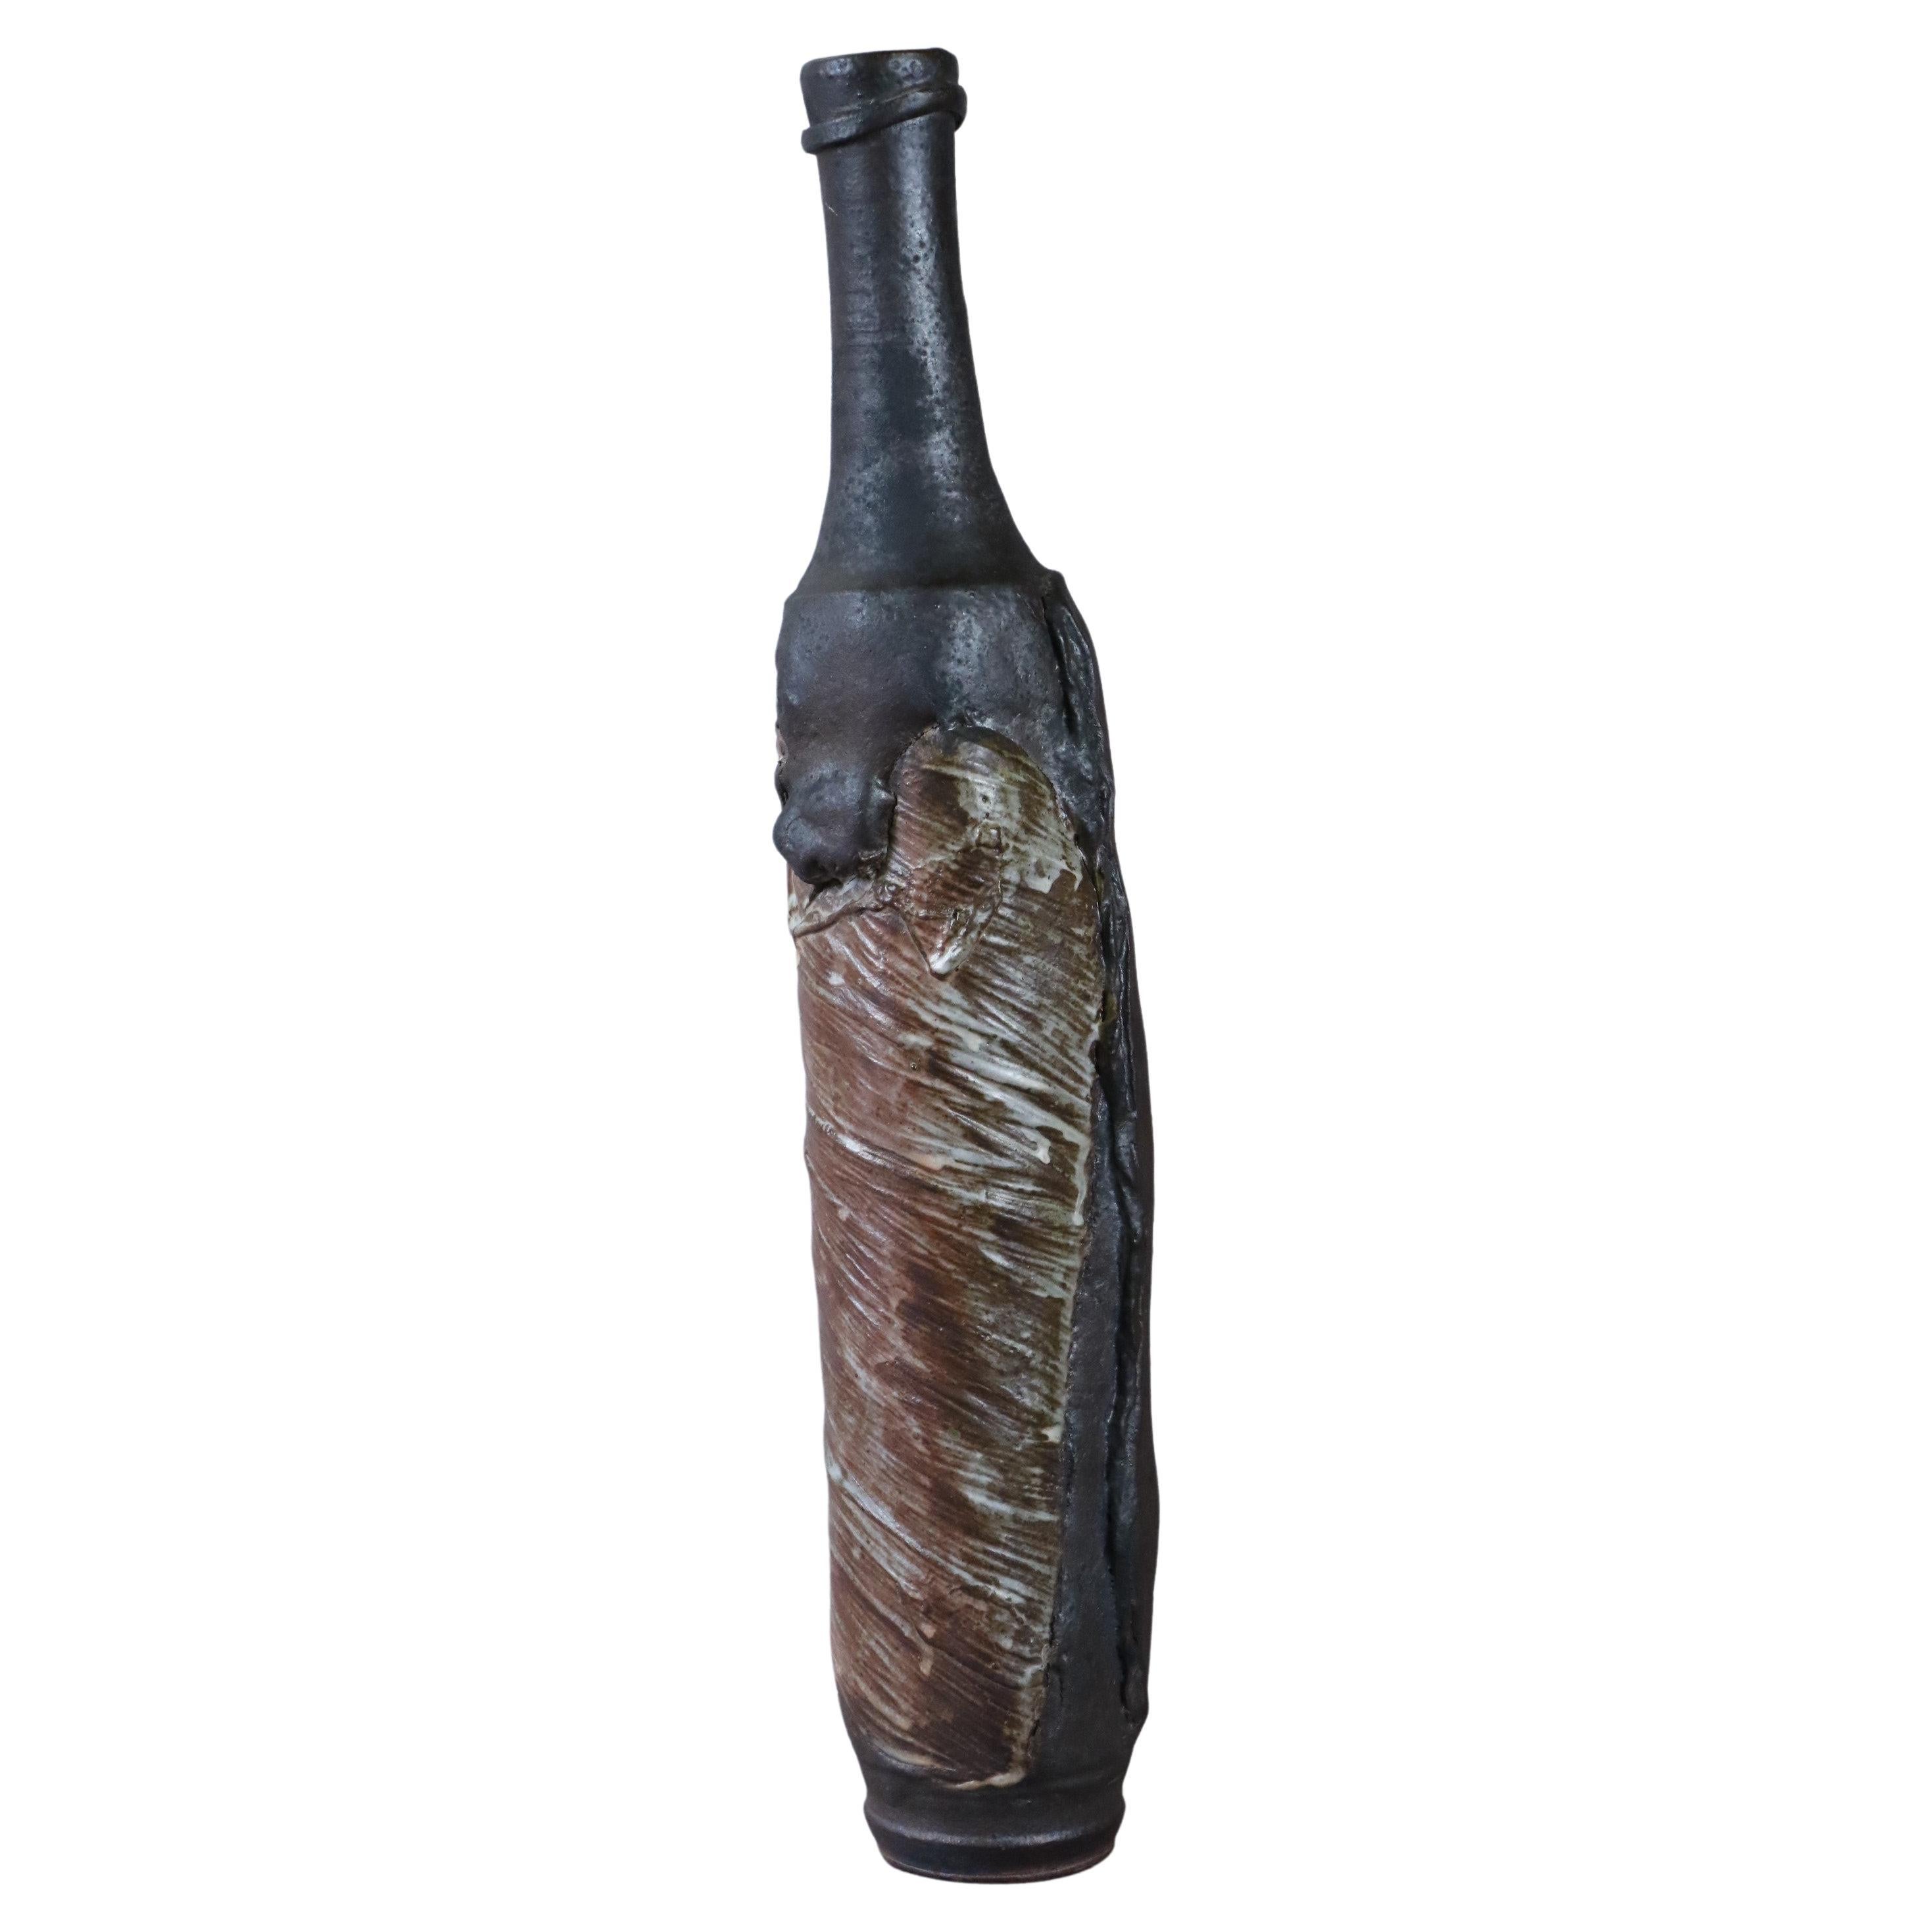 Stoneware Bottle by Alain Gaudebert, Puisaye - Era Joulia Debril Deblander Lerat

The bottle is made of stoneware and is glazed in earthy, shaded tones. It presents a very original work on the material. The inspiration is brutalist.
It is signed